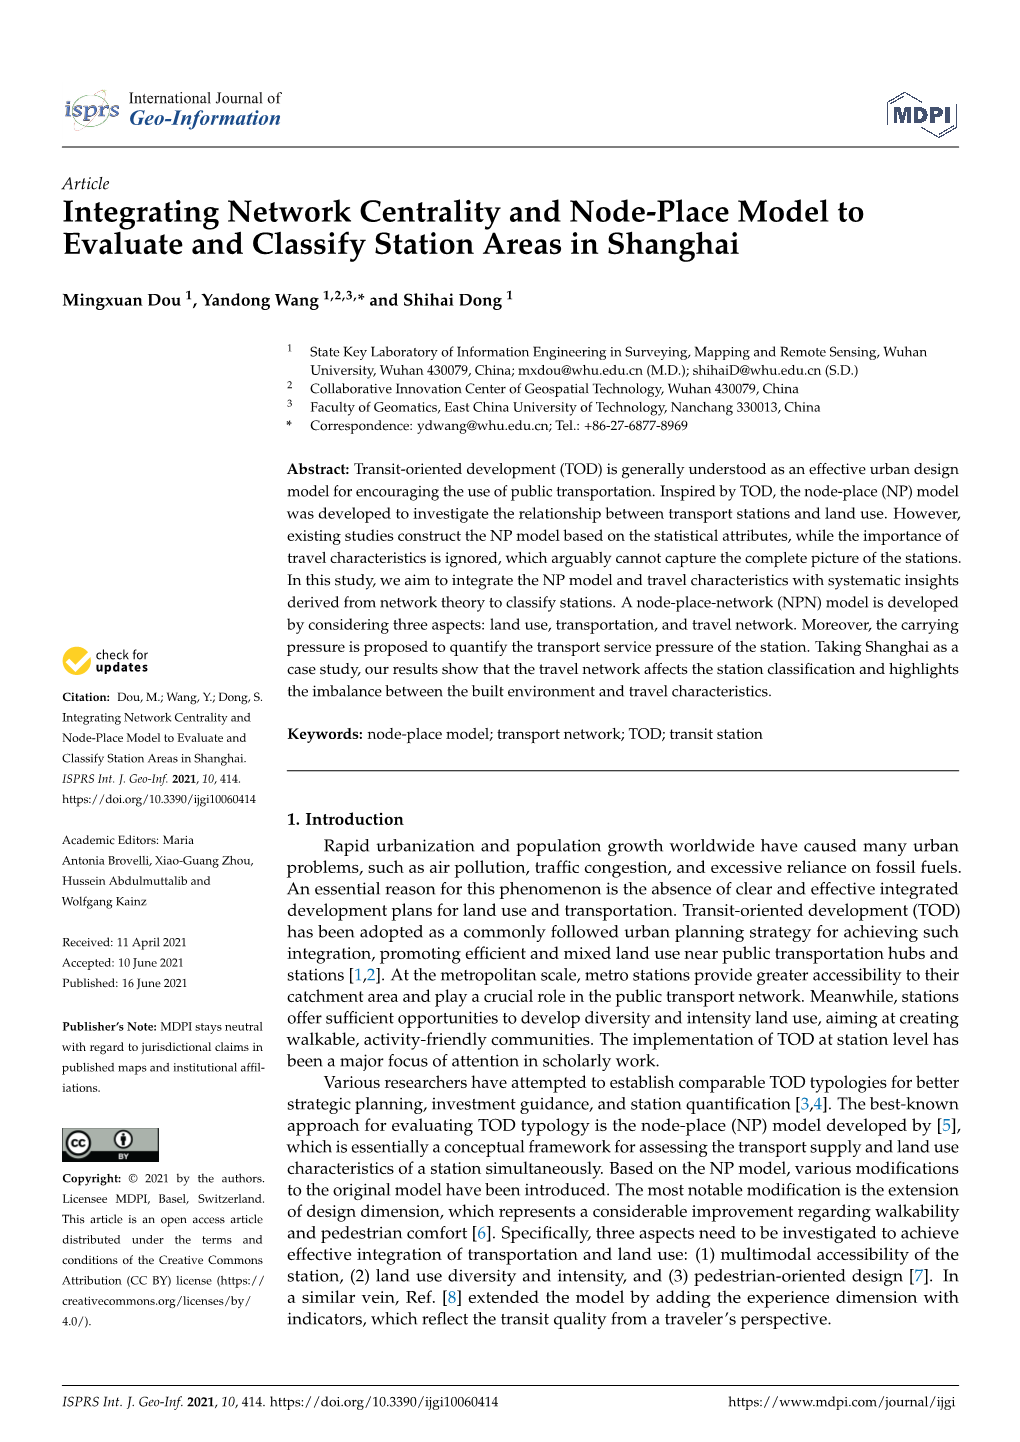 Integrating Network Centrality and Node-Place Model to Evaluate and Classify Station Areas in Shanghai